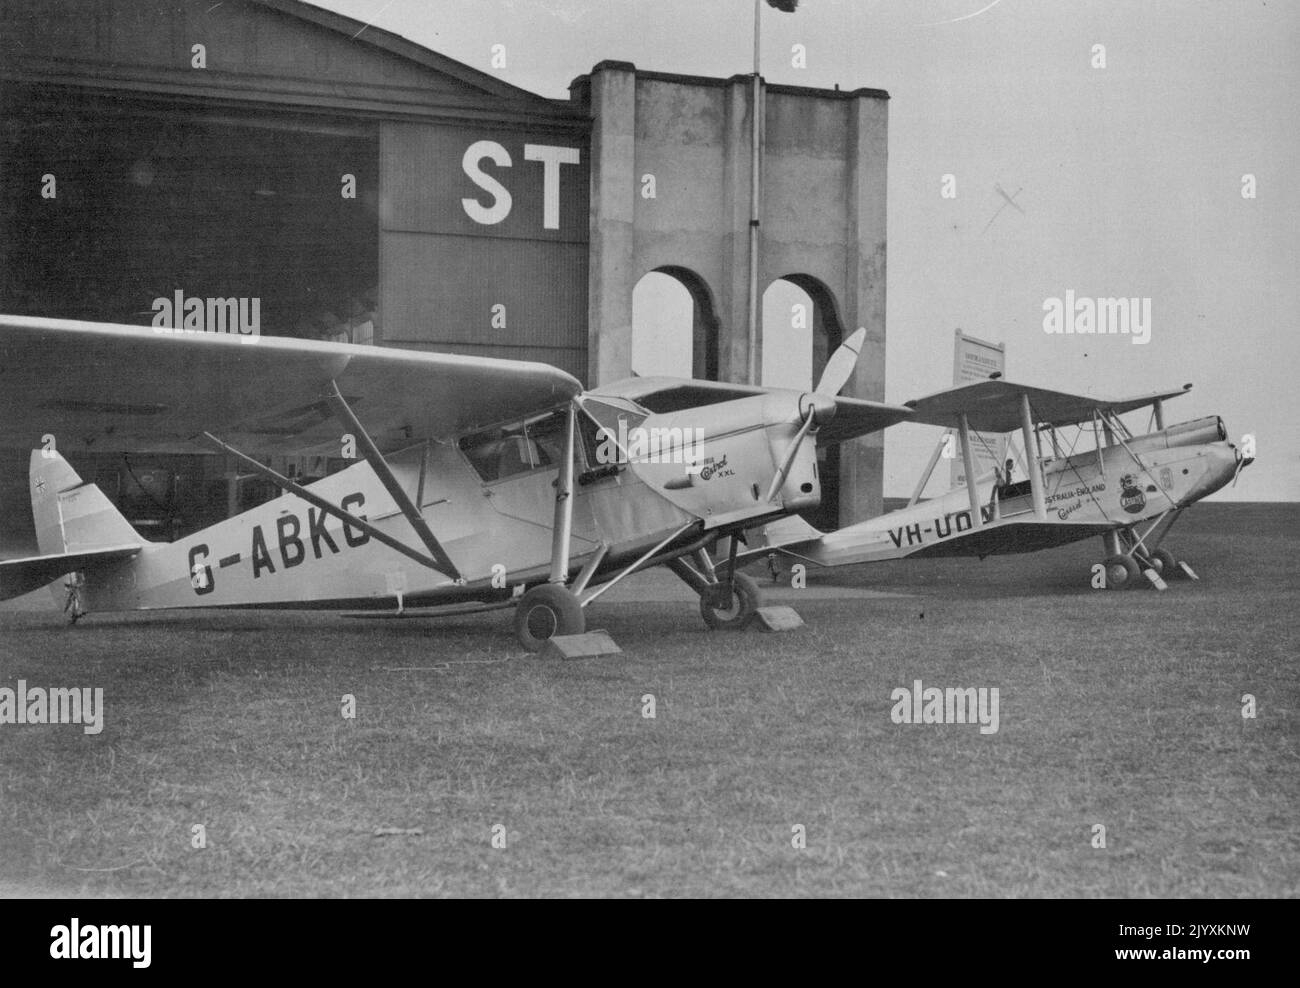 Famous British Airman Out To Break Two New World's Long-Distance Records. Mollison and Scott's machines ready to start from Lympne Aerodrome. Mr. C.W.A. Scott, and Mr. J.A. Mollison, are attempting to break two world's records. Mr. Scott to Australia and Mr. Mollison to the Cape. The Australian record is 9 days, 2 hours 29 mins., and the cape record 5 days 6 hours. The present records are held by Mr. Bulter and Miss Salaman respectively. May 4, 1932. (Photo by Central News). Stock Photo